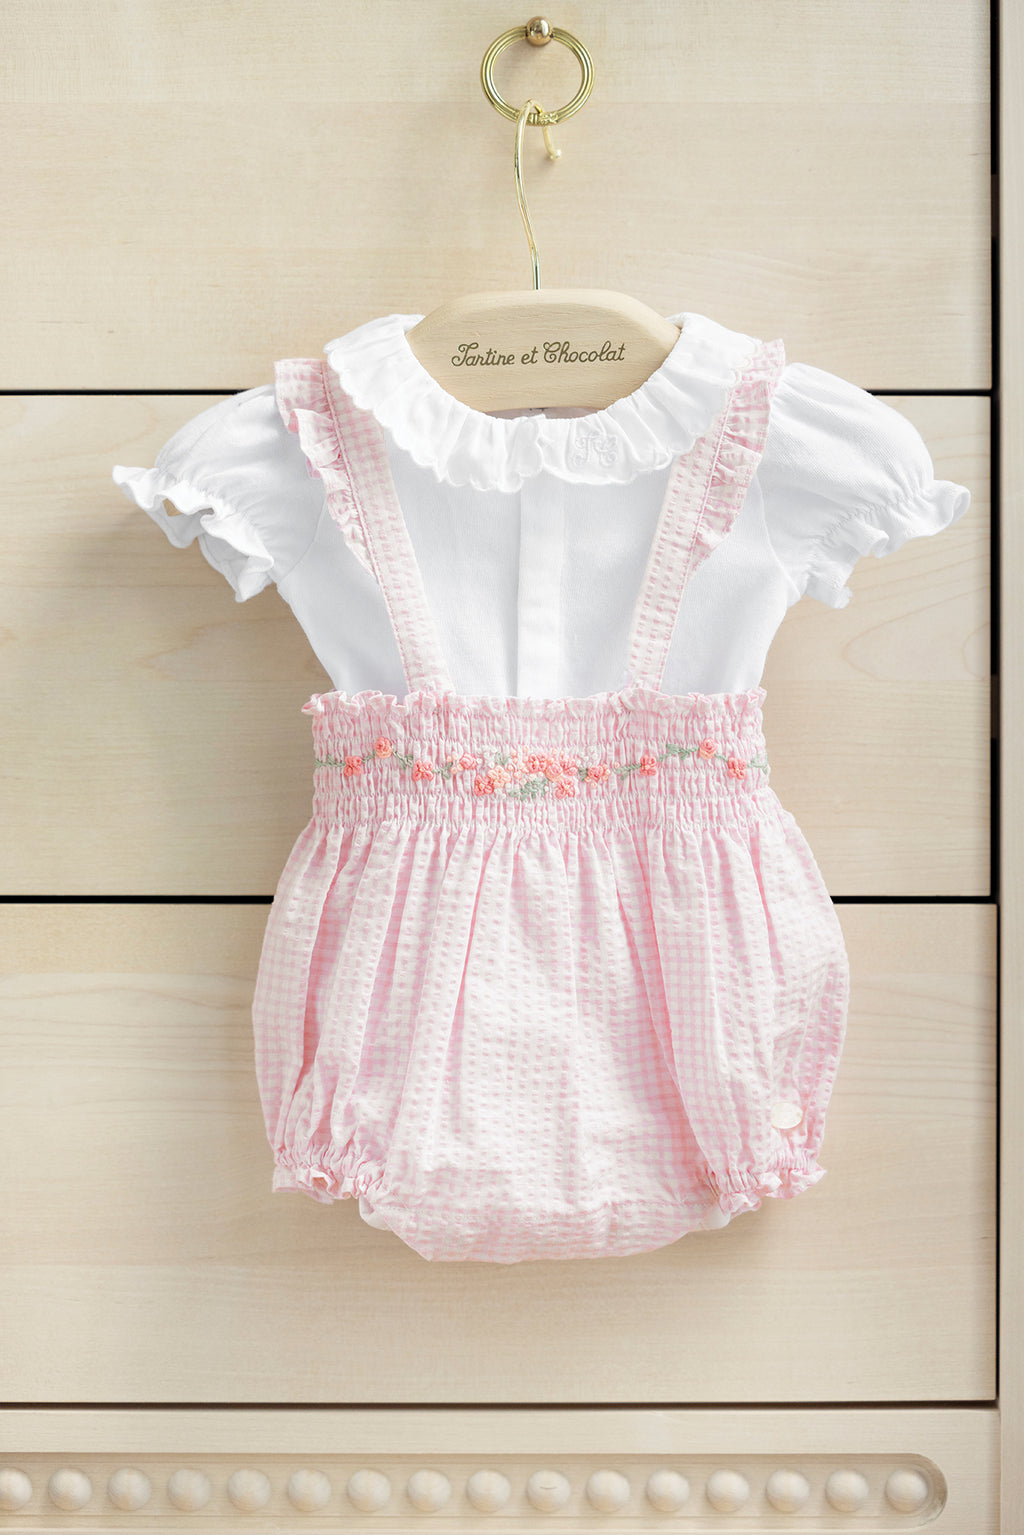 Outfit short - Pale pink Two-tone gingham